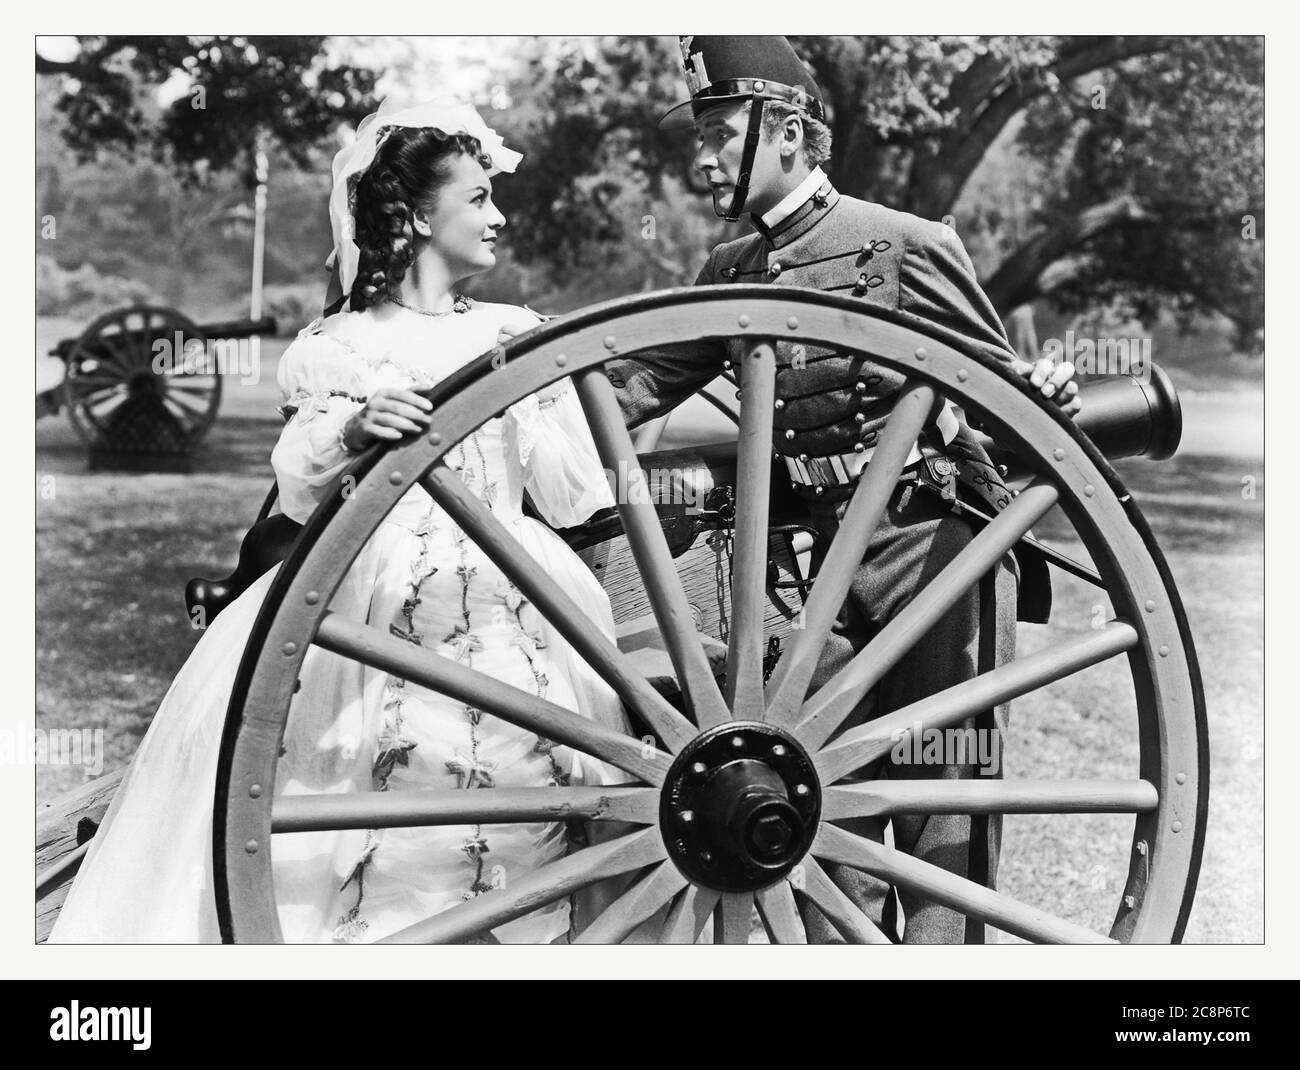 ***FILE PHOTO*** Actress Olivia de Havilland Has Passed Away at 104. They Died with Their Boots On is a 1941 black-and-white American western film from Warner Bros. Pictures, produced by Hal B. Wallis and Robert Fellows, directed by Raoul Walsh, that stars Errol Flynn and Olivia de Havilland. The film's storyline offers a highly fictionalized account of the life of Gen. George Armstrong Custer, from the time he enters West Point military academy through the American Civil War and finally to his death at the Battle of the Little Bighorn. Custer is portrayed as a fun-loving, dashing figure who Stock Photo